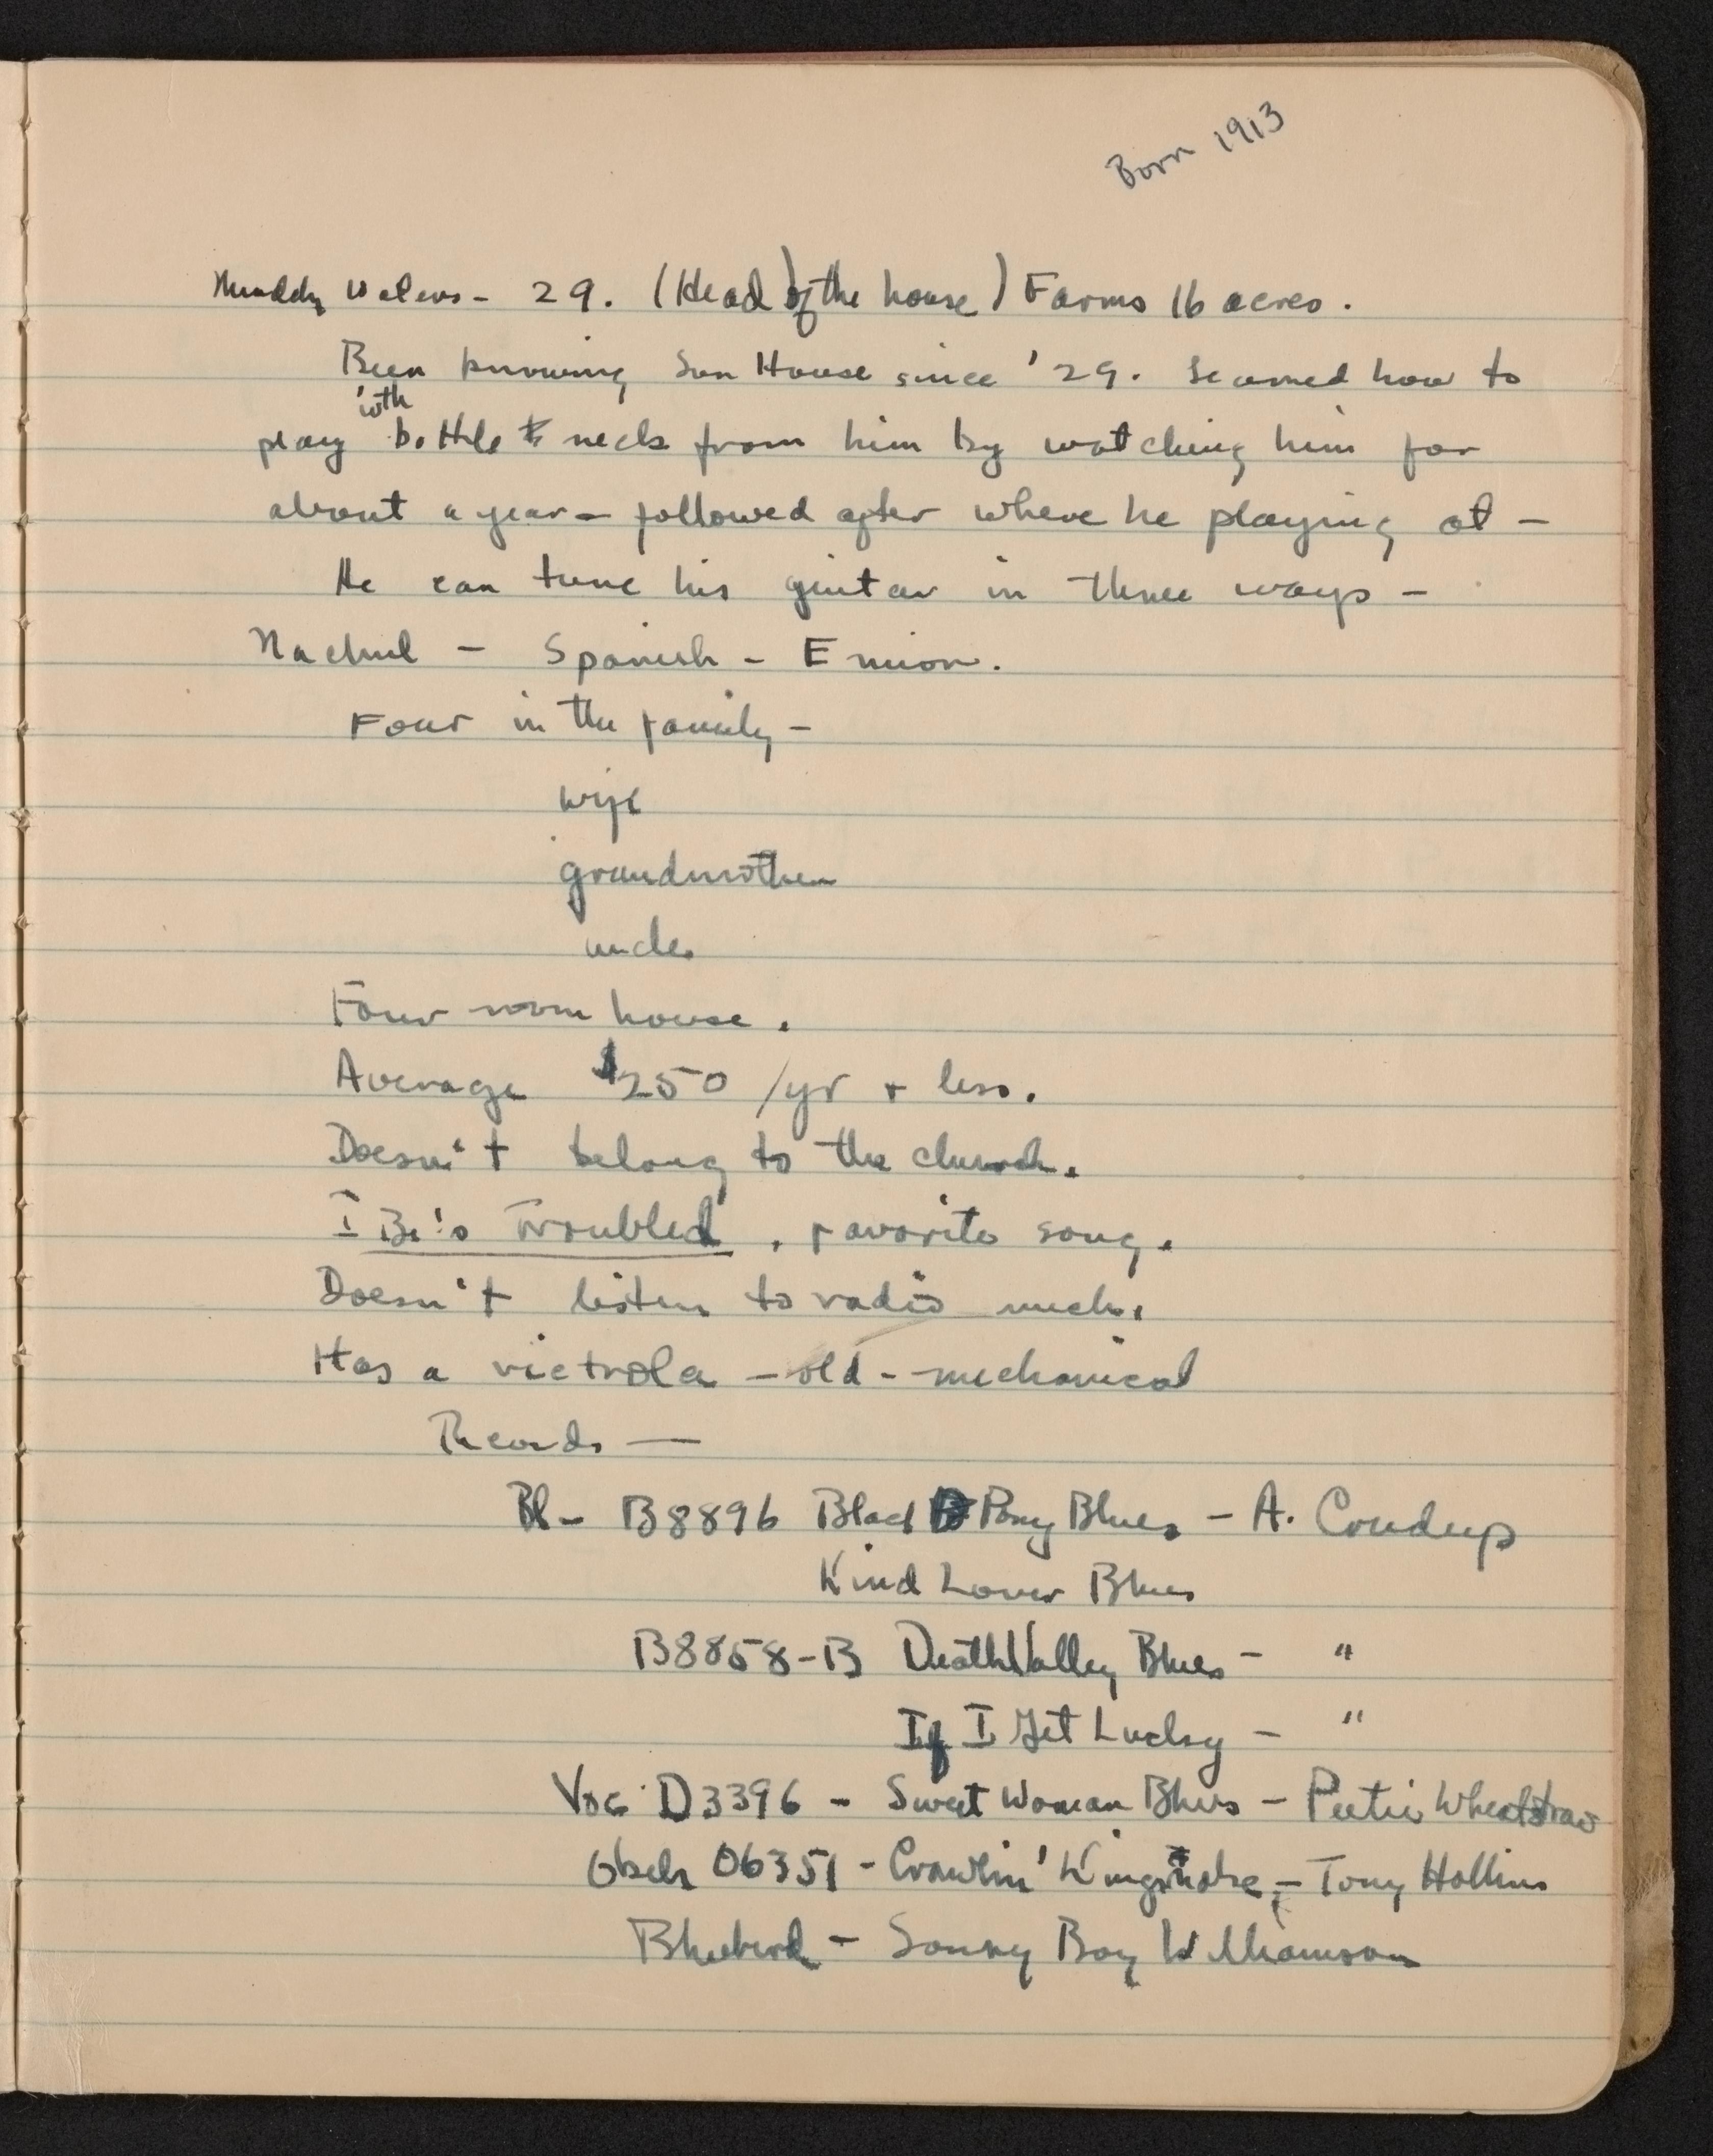 Alan Lomax's notes on Muddy Waters's interview. Credit: Alan Lomax collection (AFC 2004/004), American Folklife Center, Library of Congress